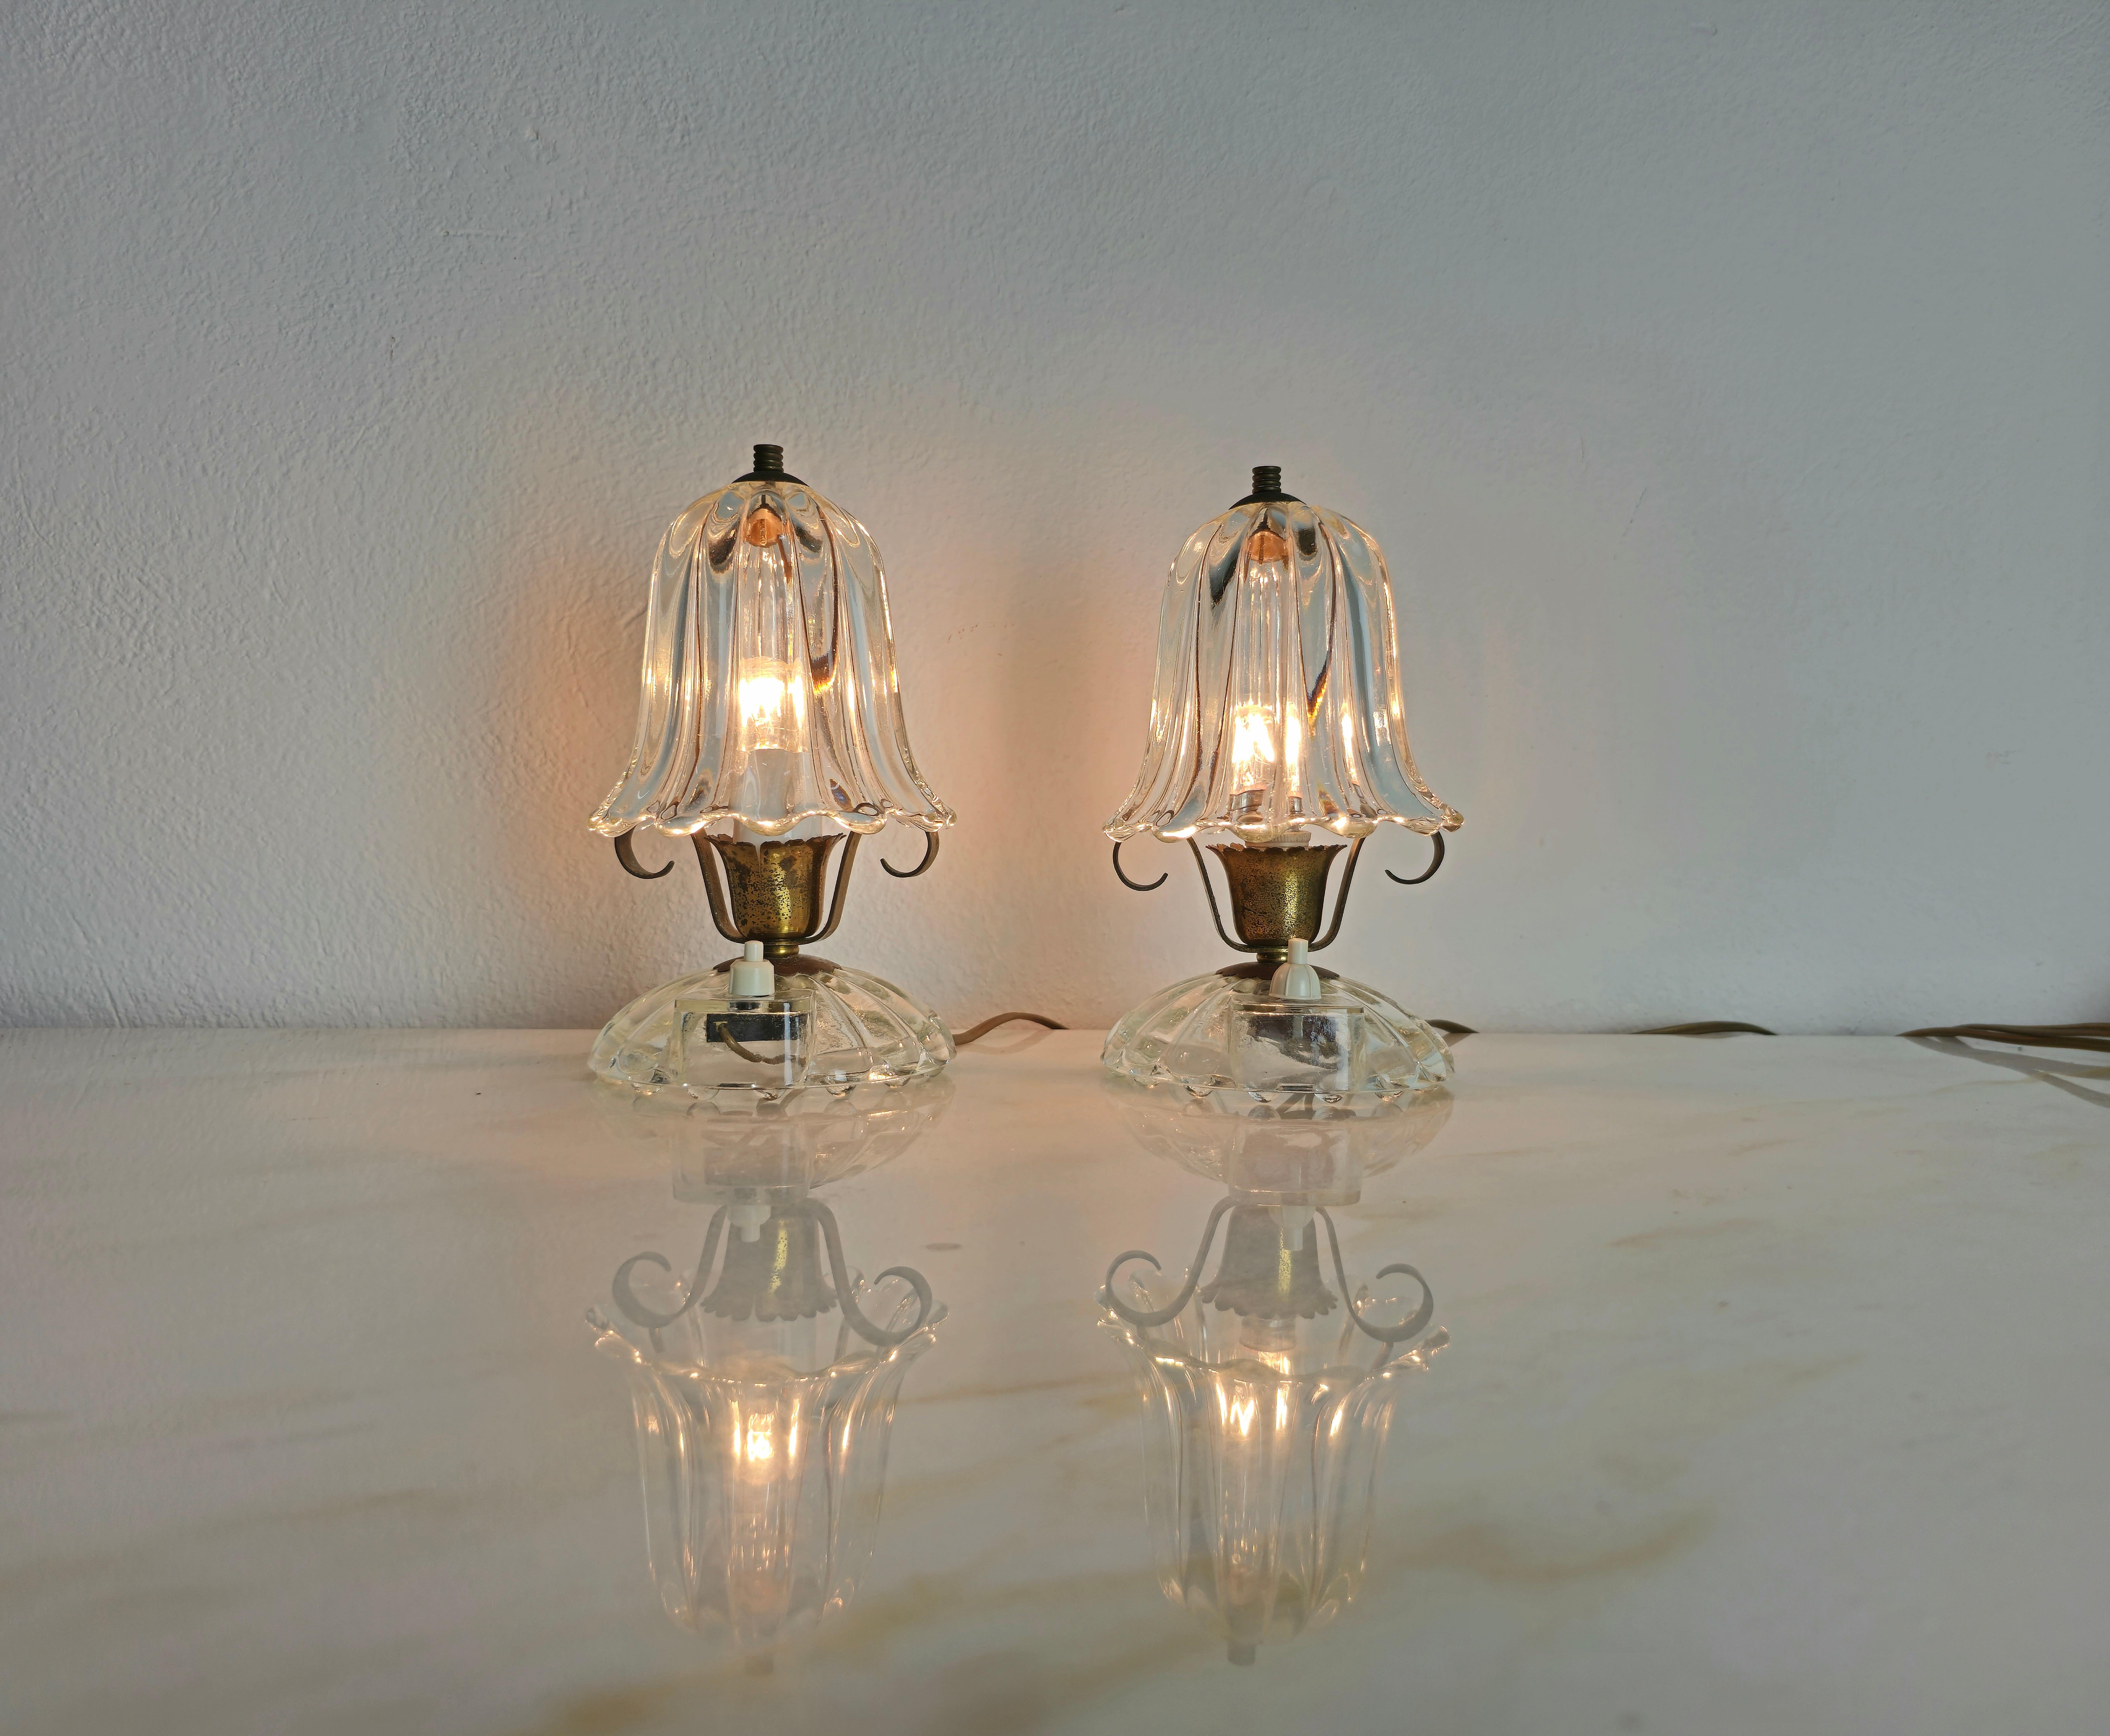 Set of 2 small table lamps produced in Italy in the 1950s by Barovier and Toso.
Each individual table lamp is made with a brass structure and Murano glass diffuser and base.